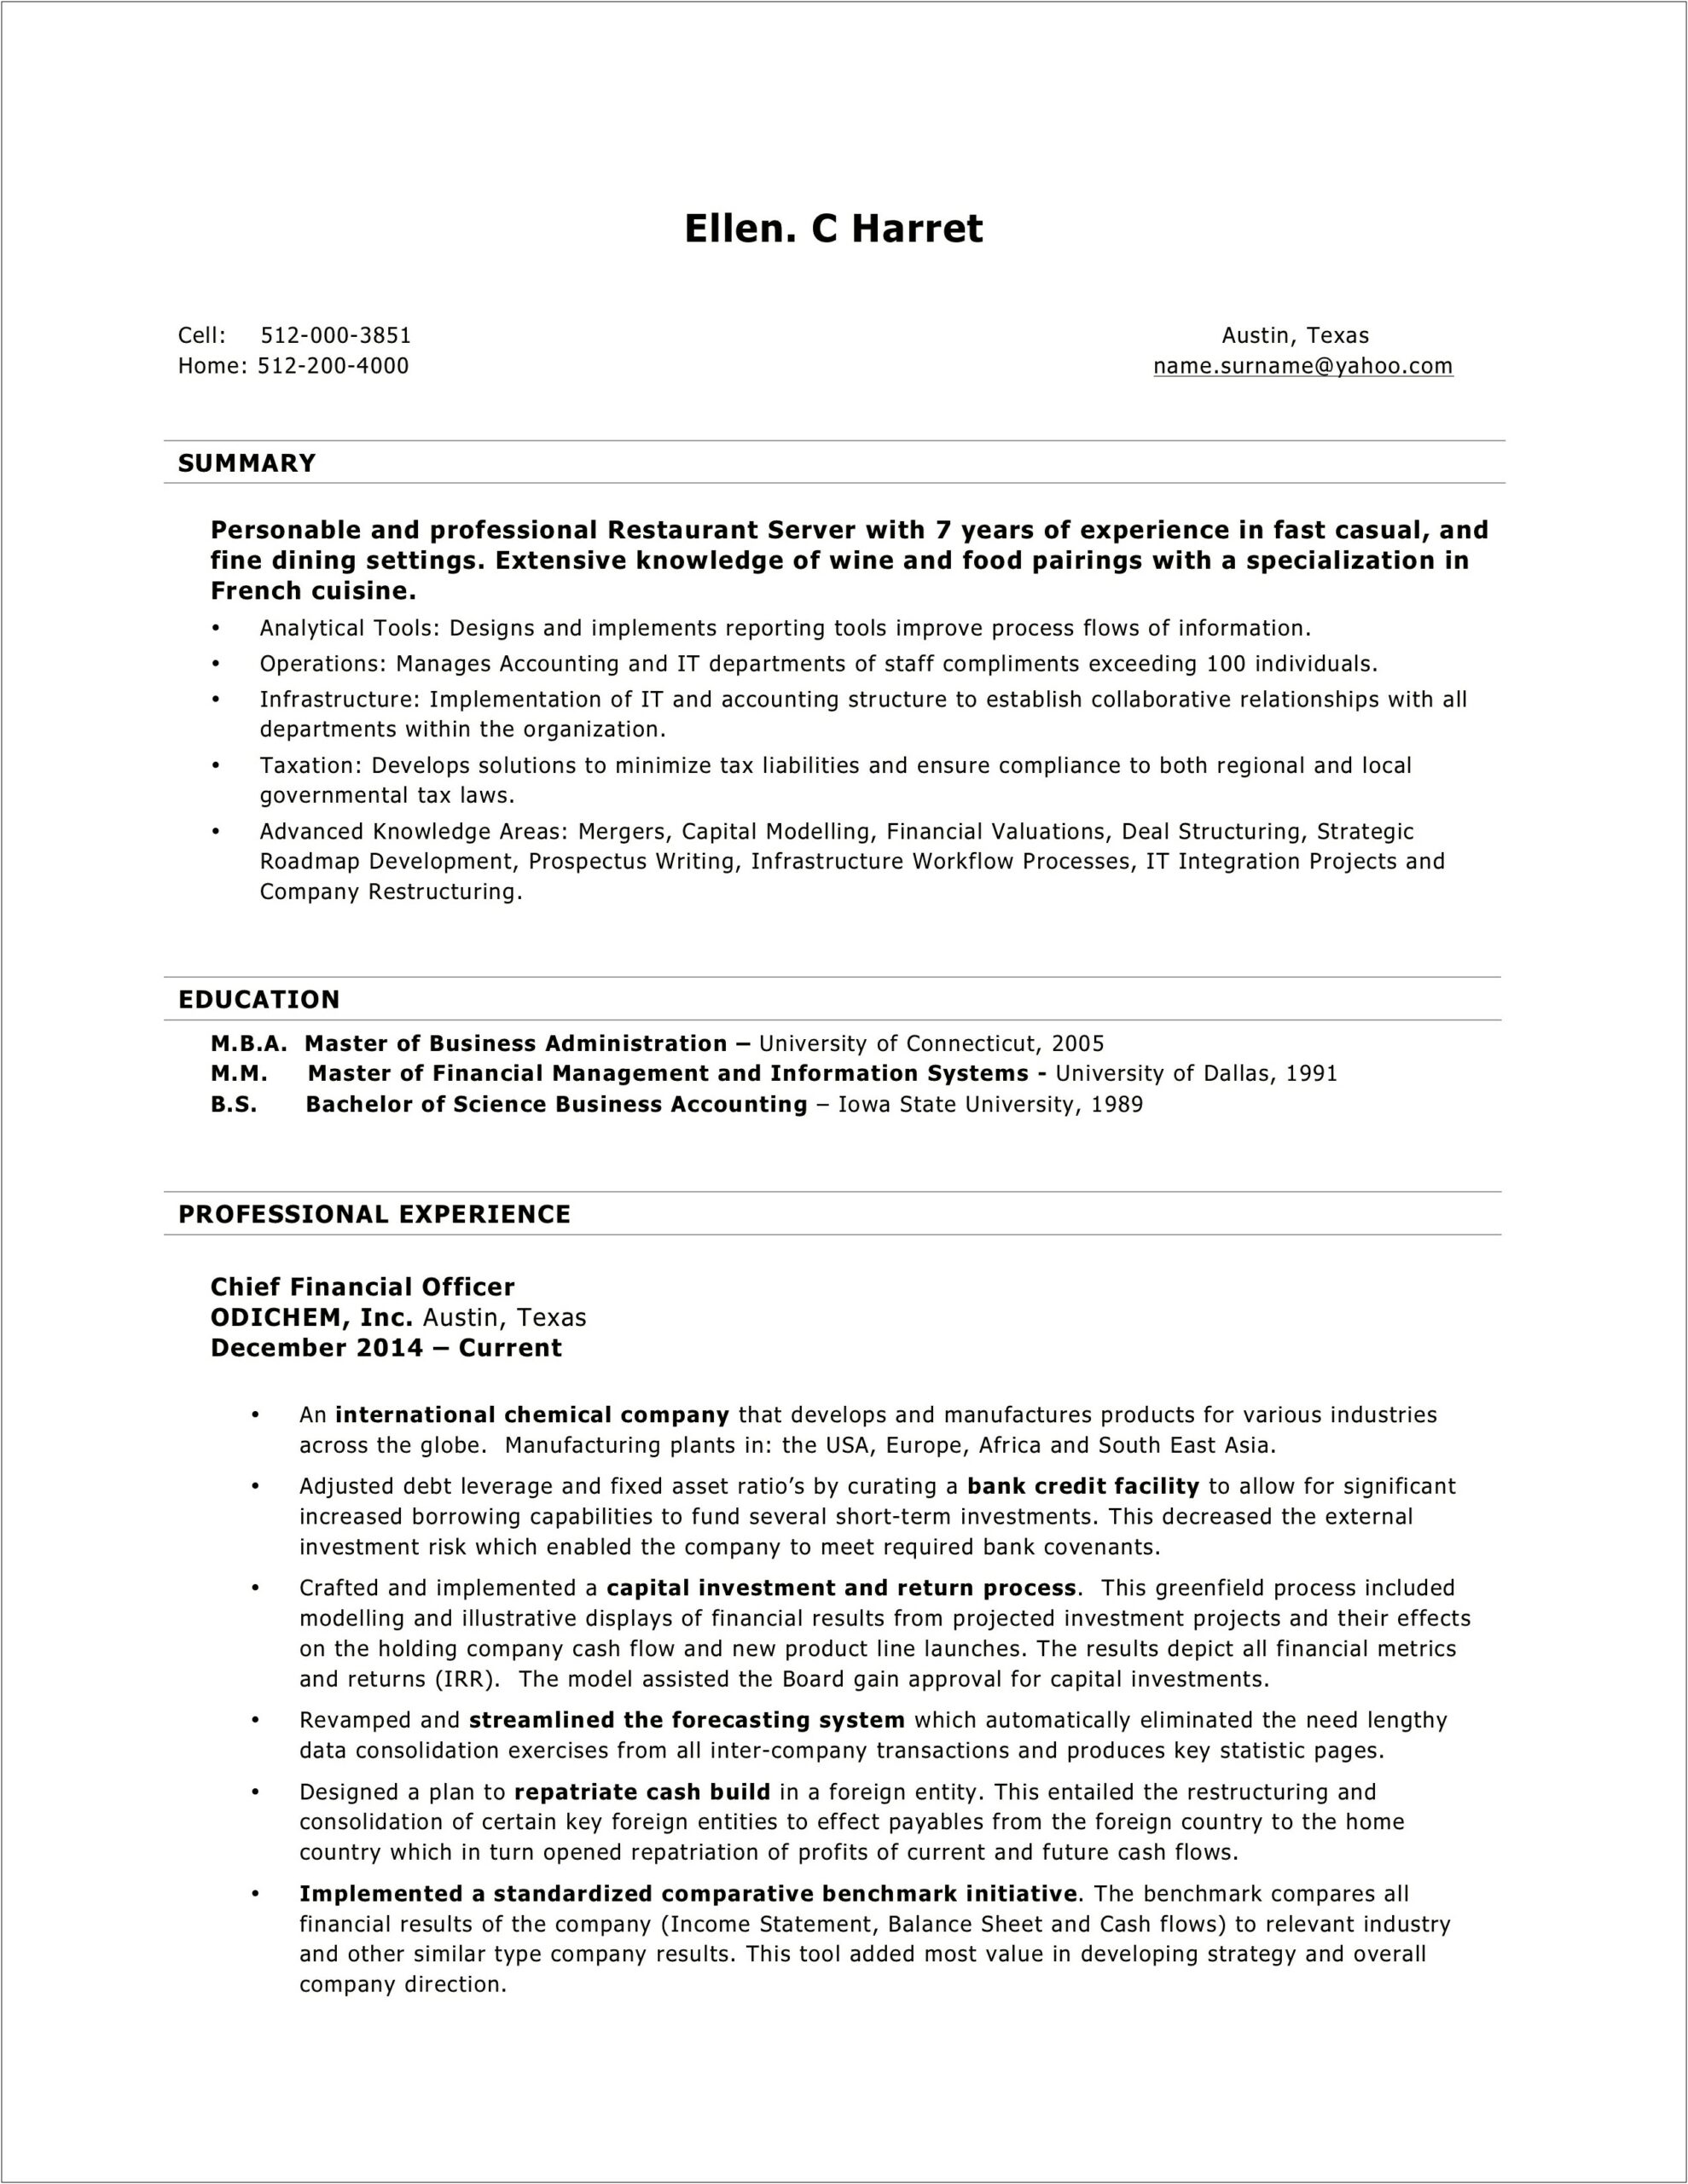 Best Style Of Resume For Sales 3xecutive